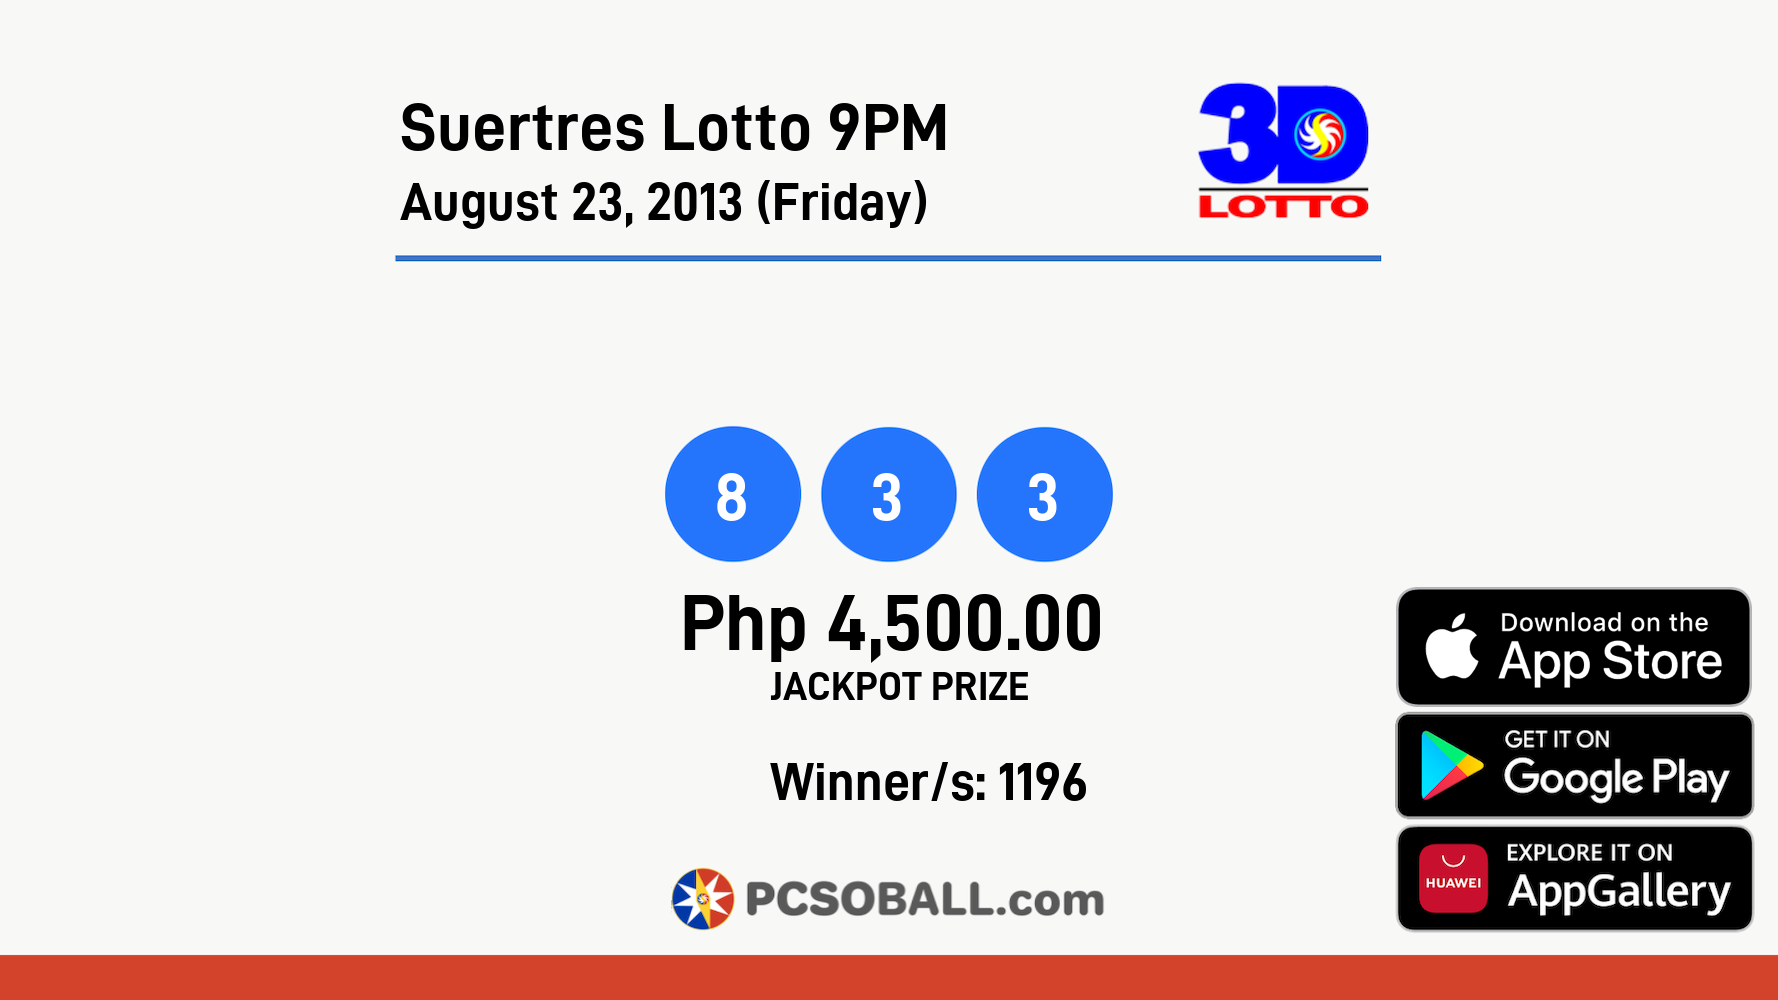 Suertres Lotto 9PM August 23, 2013 (Friday) Result